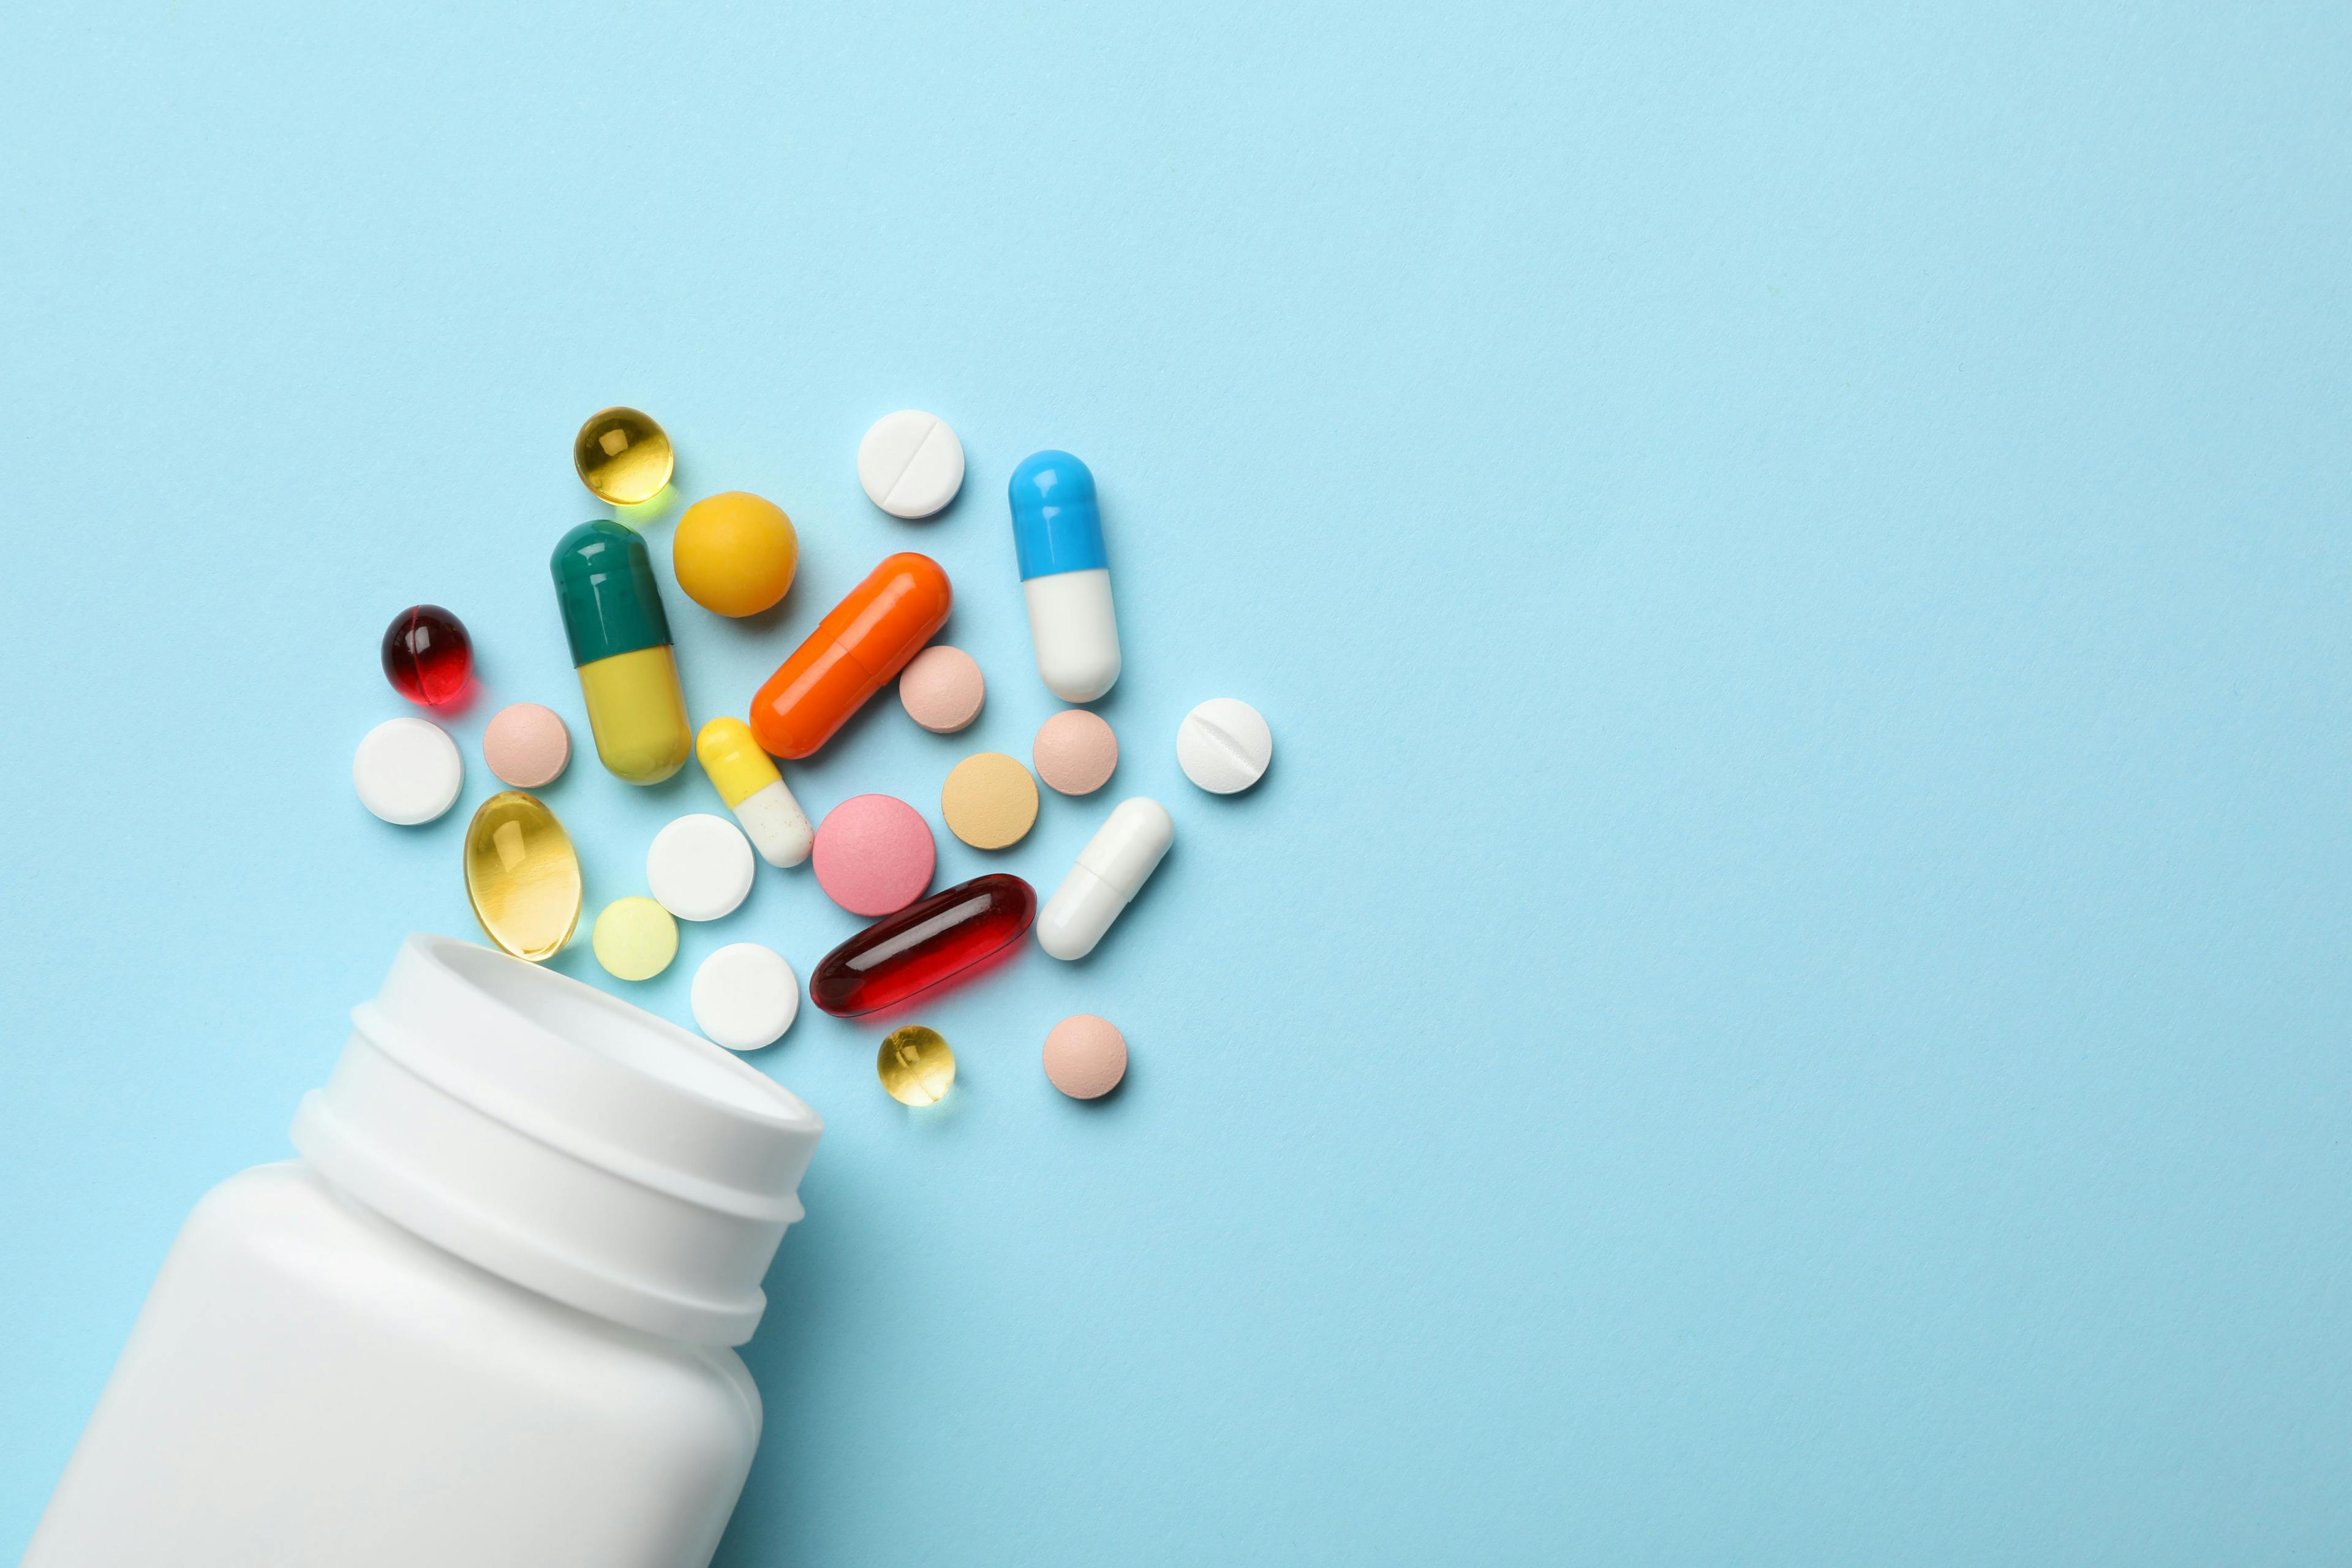 Bottle and scattered pills on blue backdrop | Image credit: New Africa - stock.adobe.com